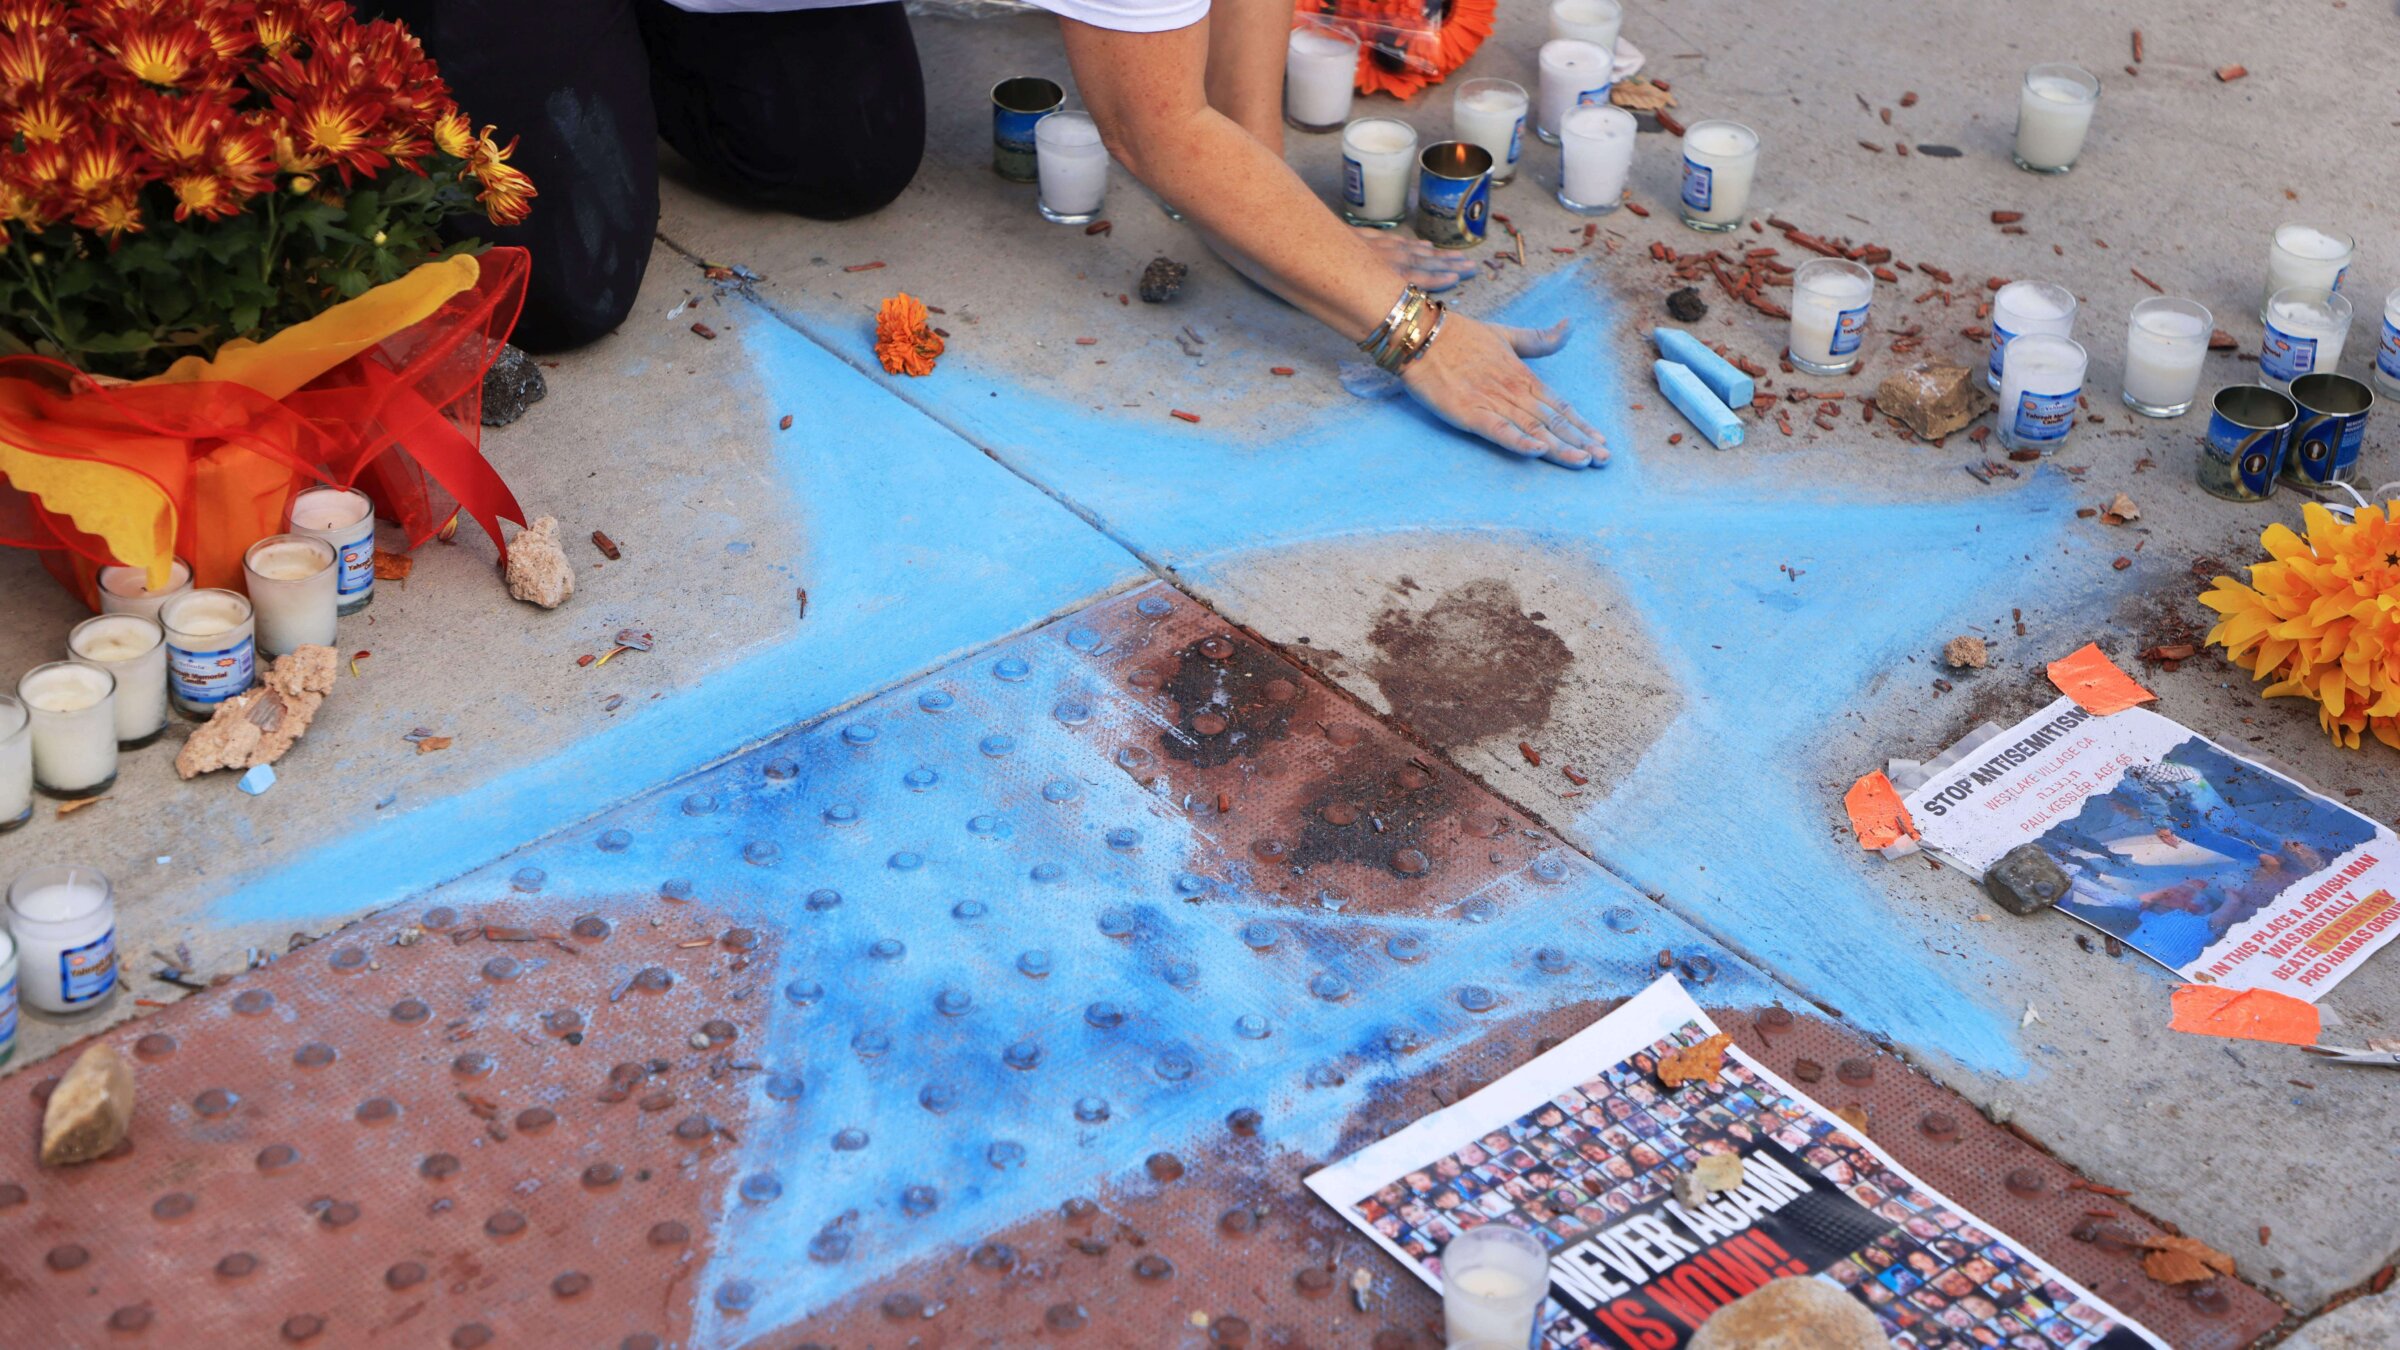 Chalk artist Elana Colombo on November 7, 2023 draws the Star of David around the blood of Paul Kessler, a Jewish man who died following an altercation during pro-Palestinian and pro-Israeli demonstrations the previous day in Thousand Oaks, California. 